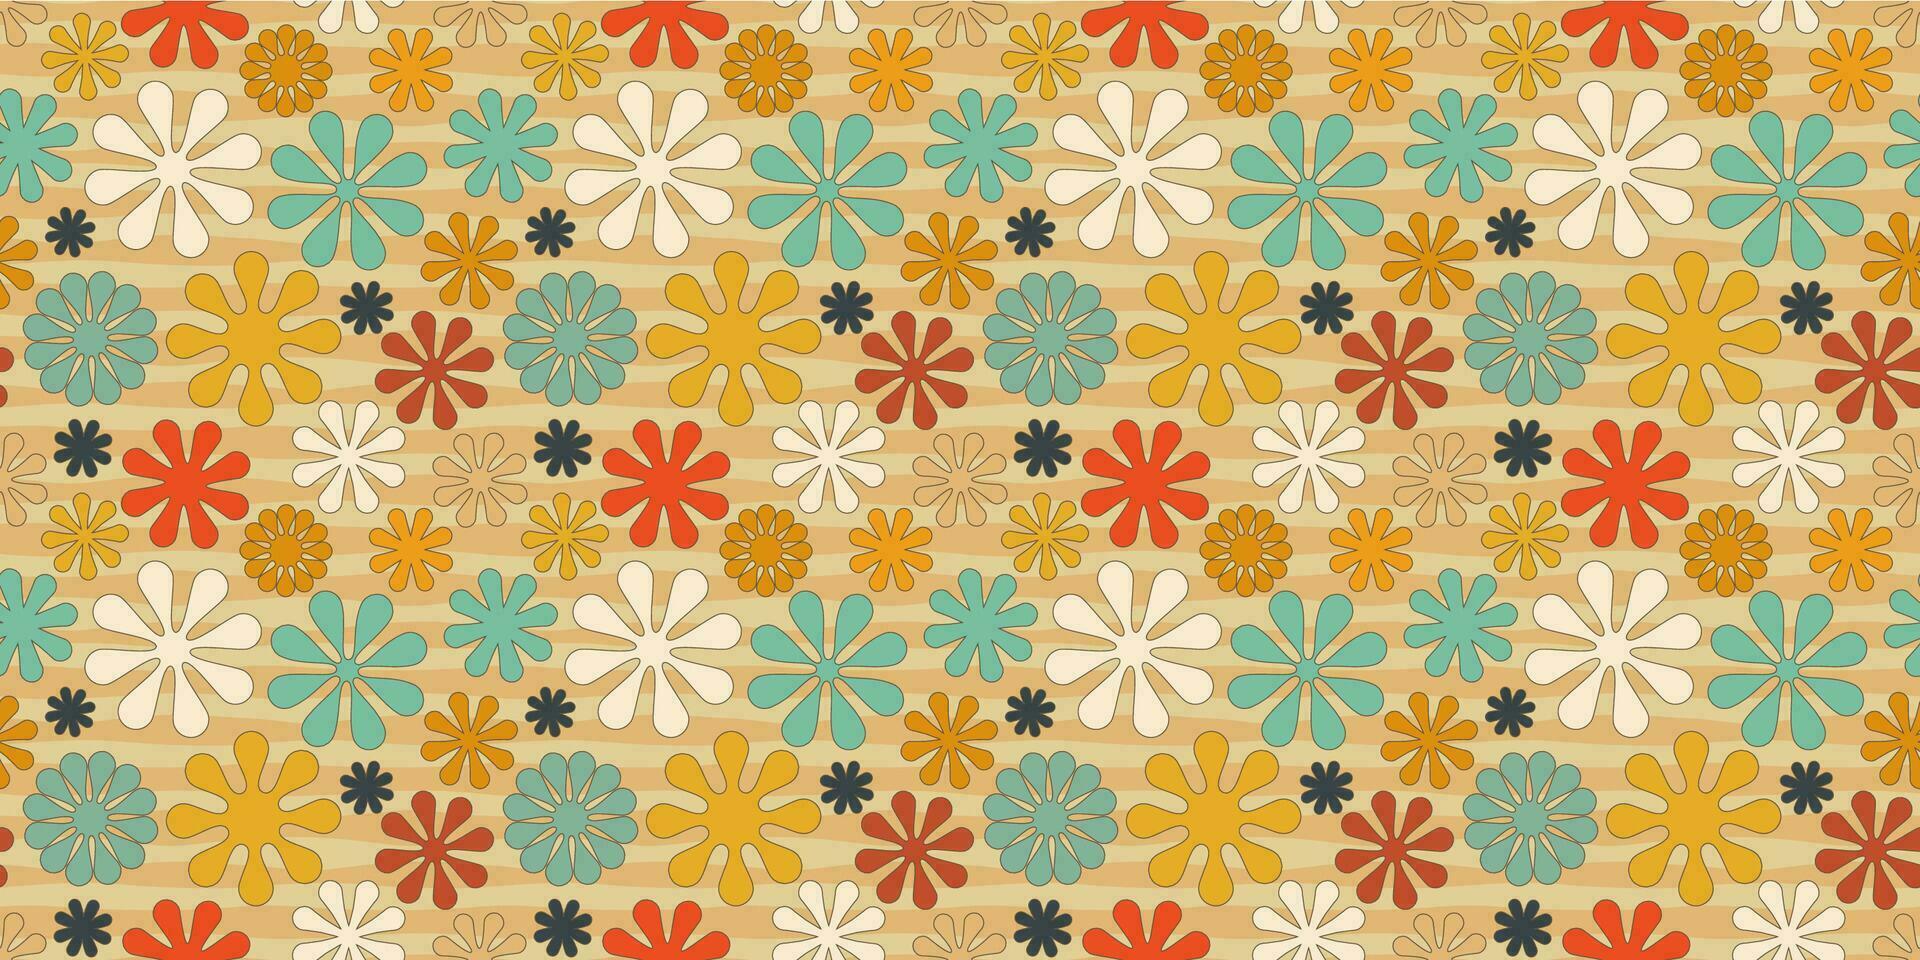 A retro style seamless pattern with a hippie flower aesthetic design and striped vector background. Print surface for textiles, wrapping, and webs.